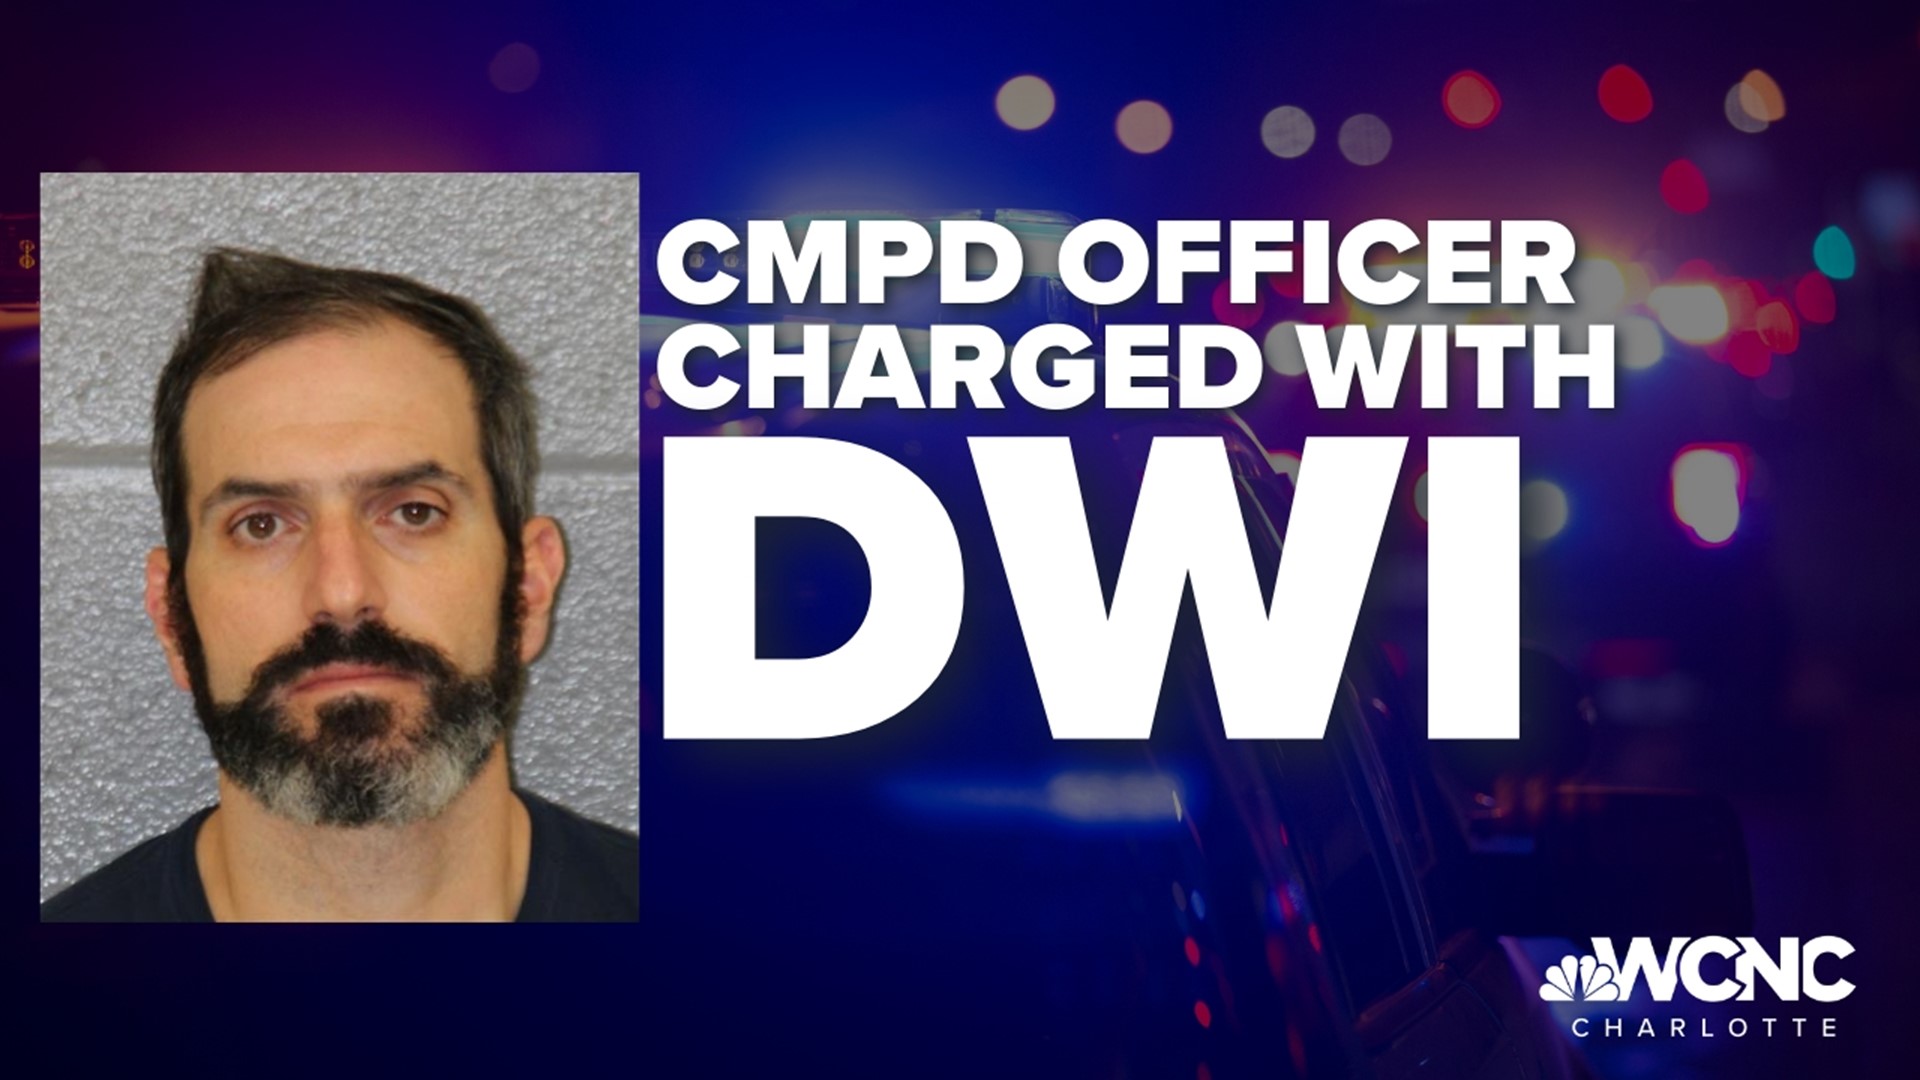 CMPD confirmed one of its officers is in custody and accused of driving under the influence.